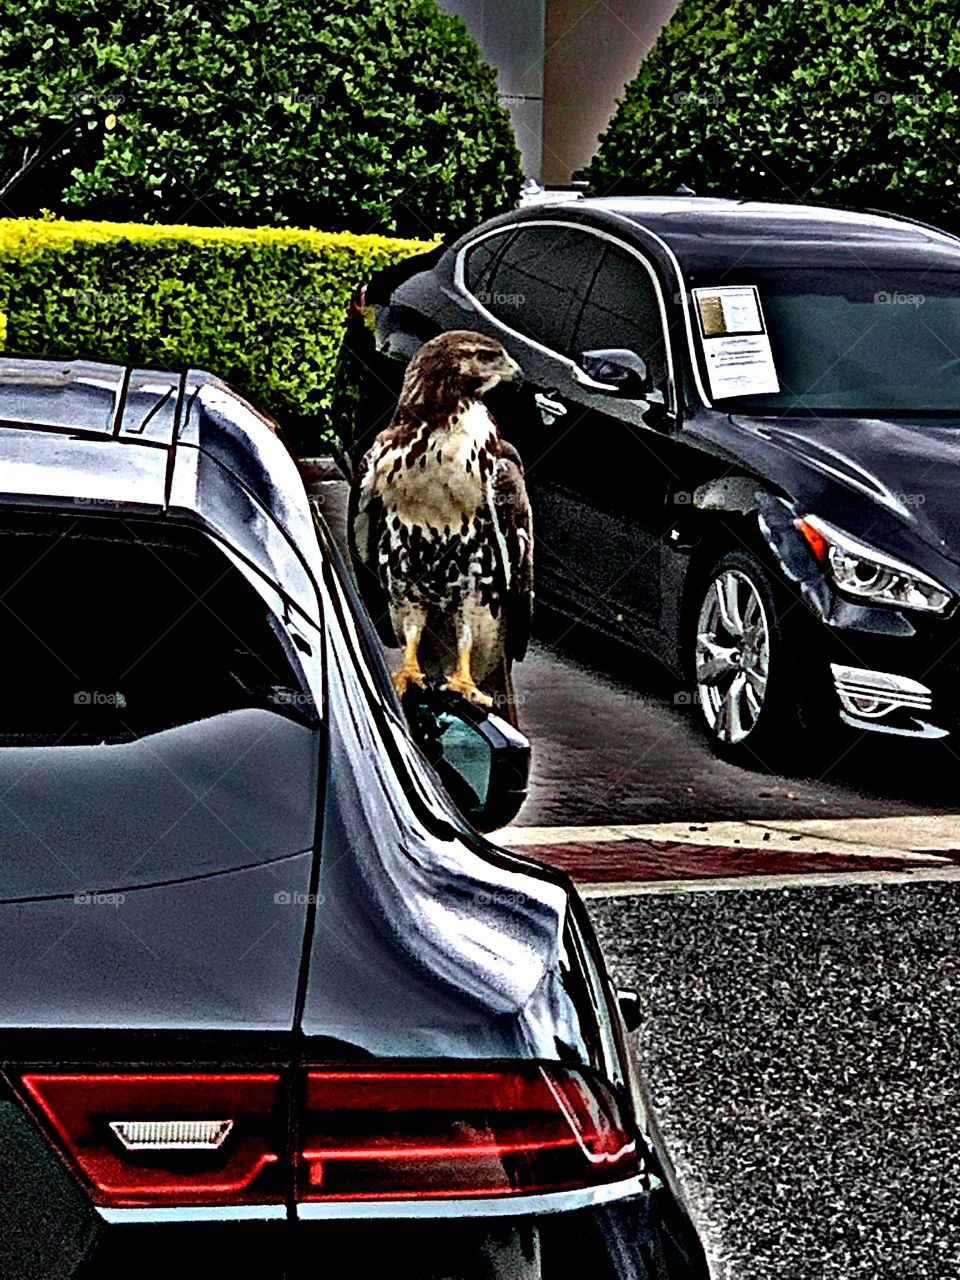 this hawk is looking like its a bald eagle just on a car tho lol. what y'all think?